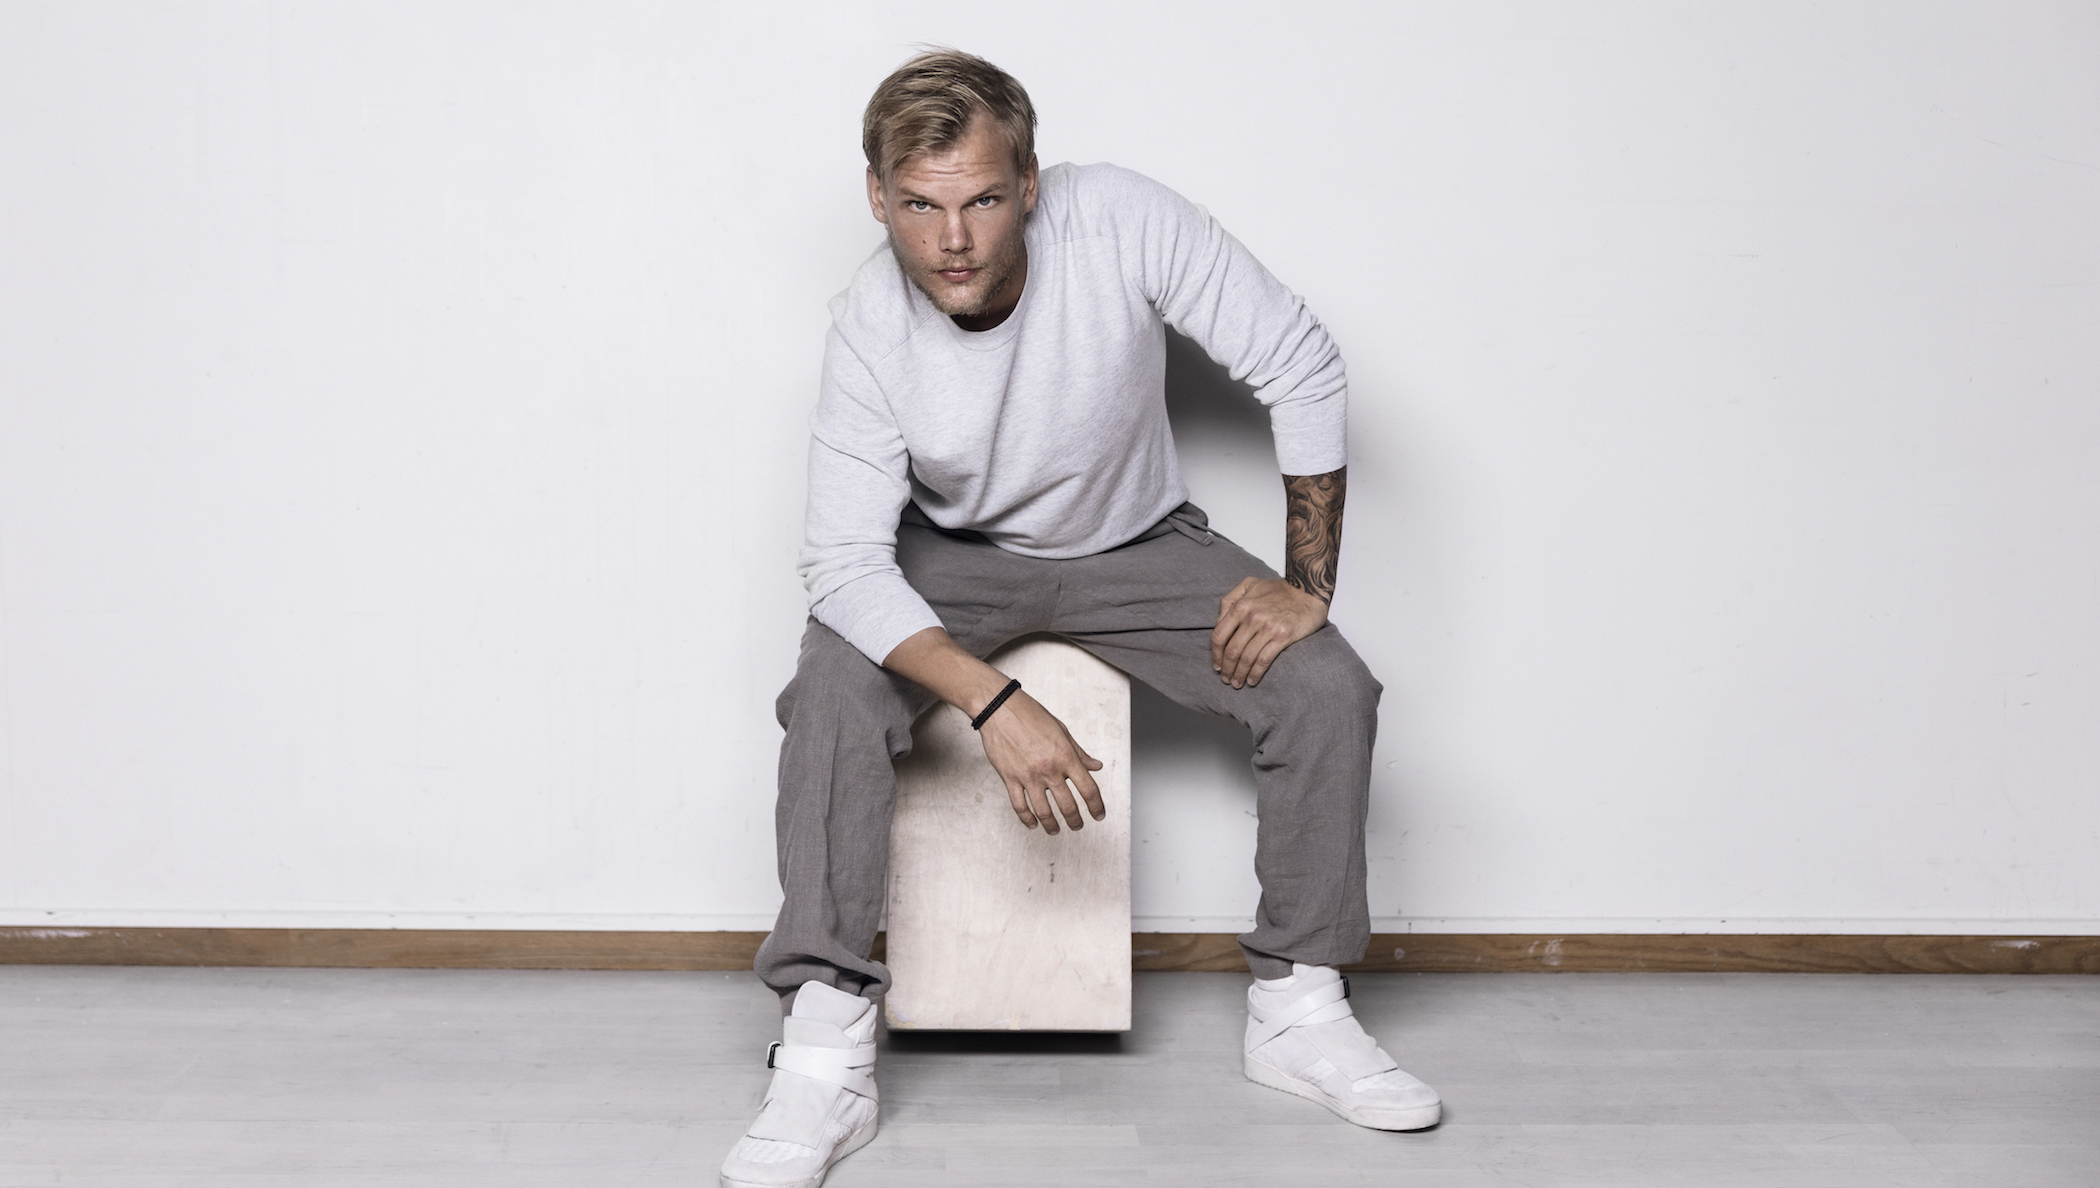 SOTD: ‘SOS’ is the first single from Avicii’s posthumous album